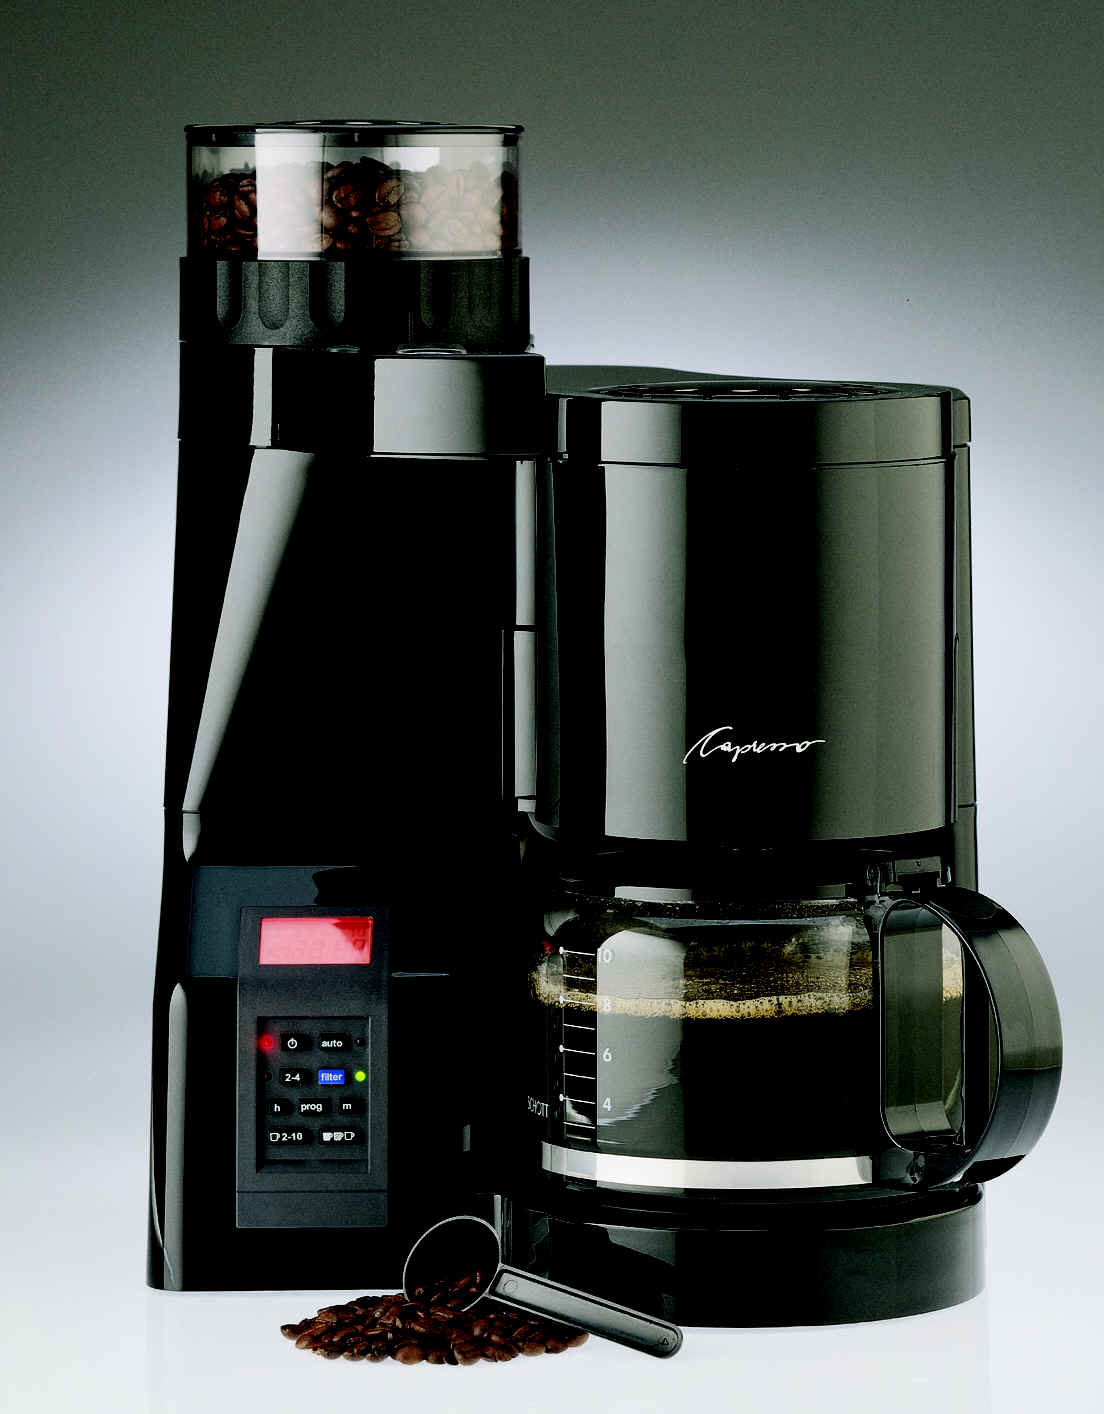 PROGRAMMABLE COFFEE MAKER 10 Cup Automatically grinds beans OR